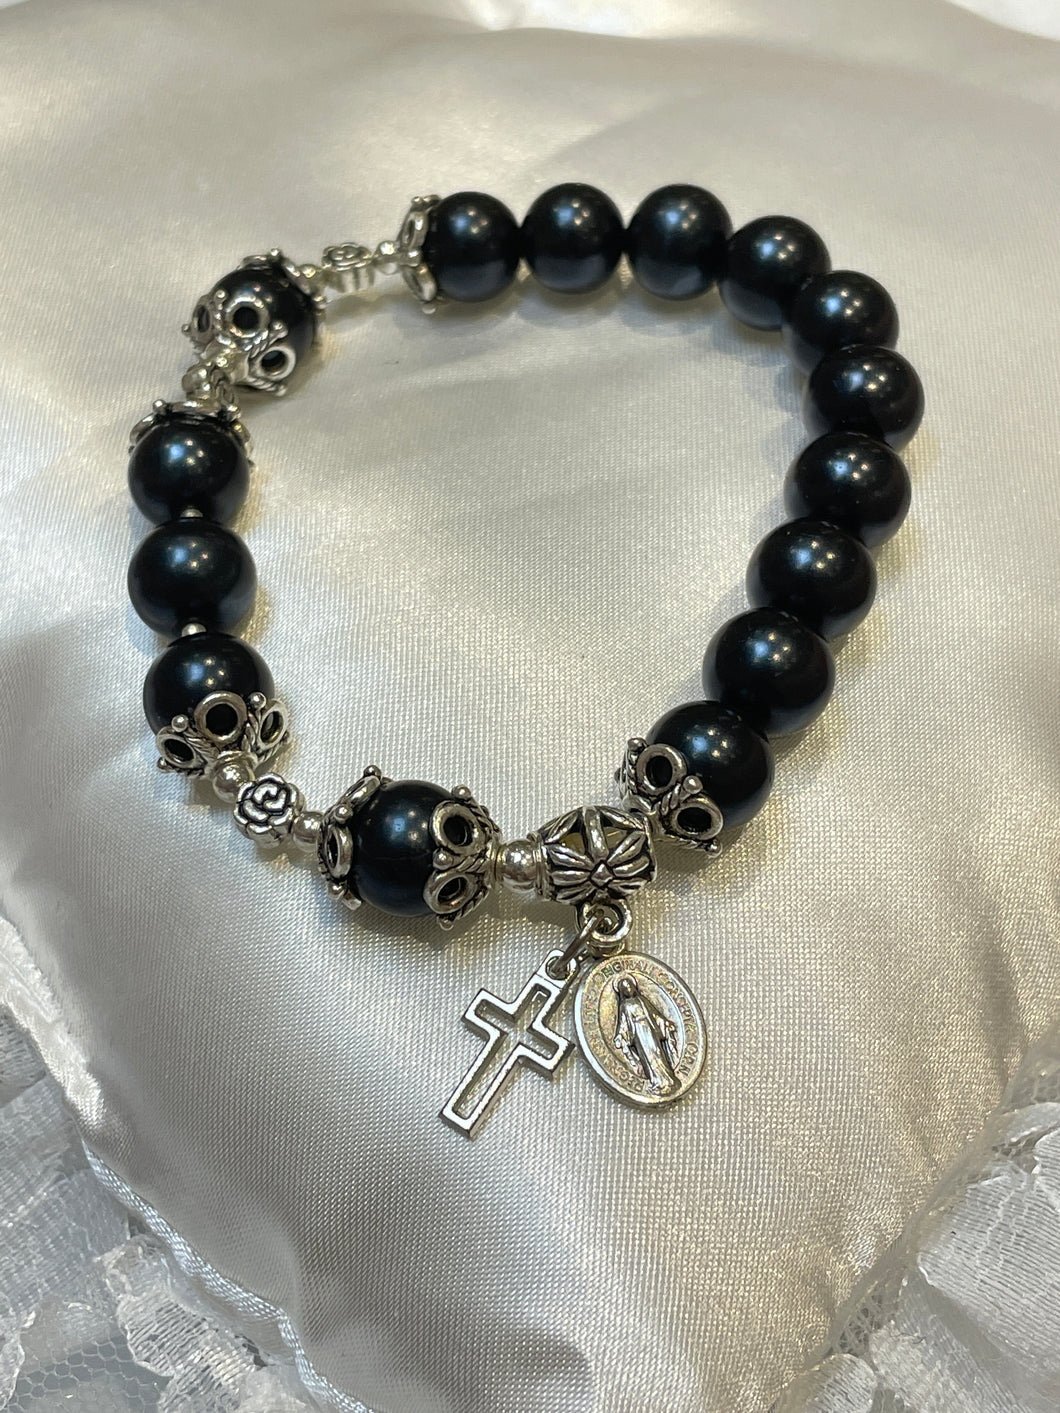 Black Gemstone Rosary Bracelet with Miraculous Medal and Cross Charm